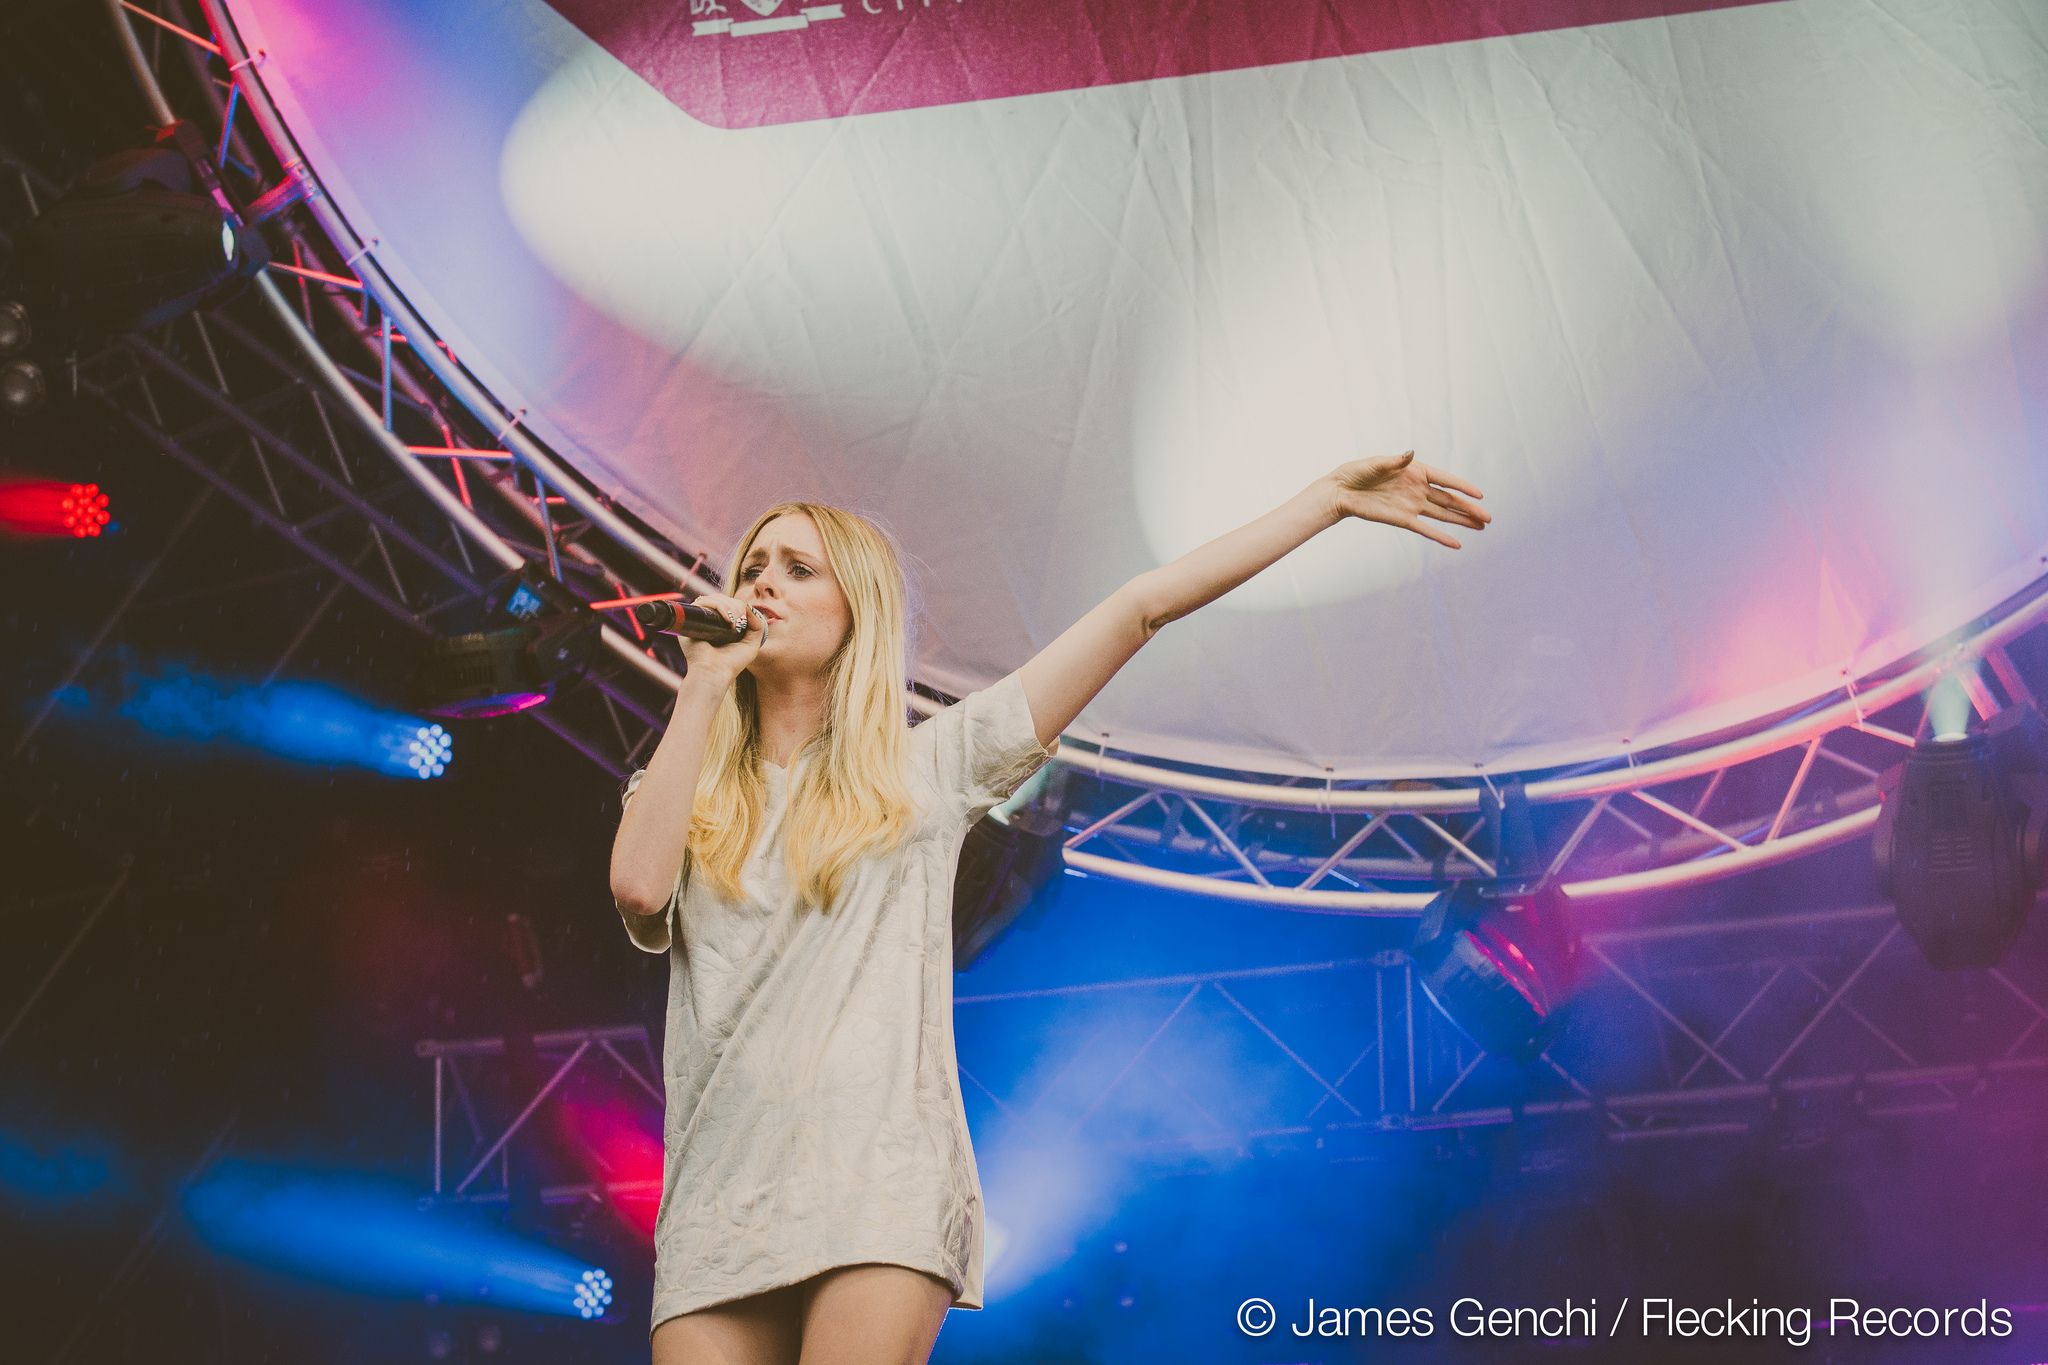 Photos: Diana Vickers flashes at Party in the Park, Leeds